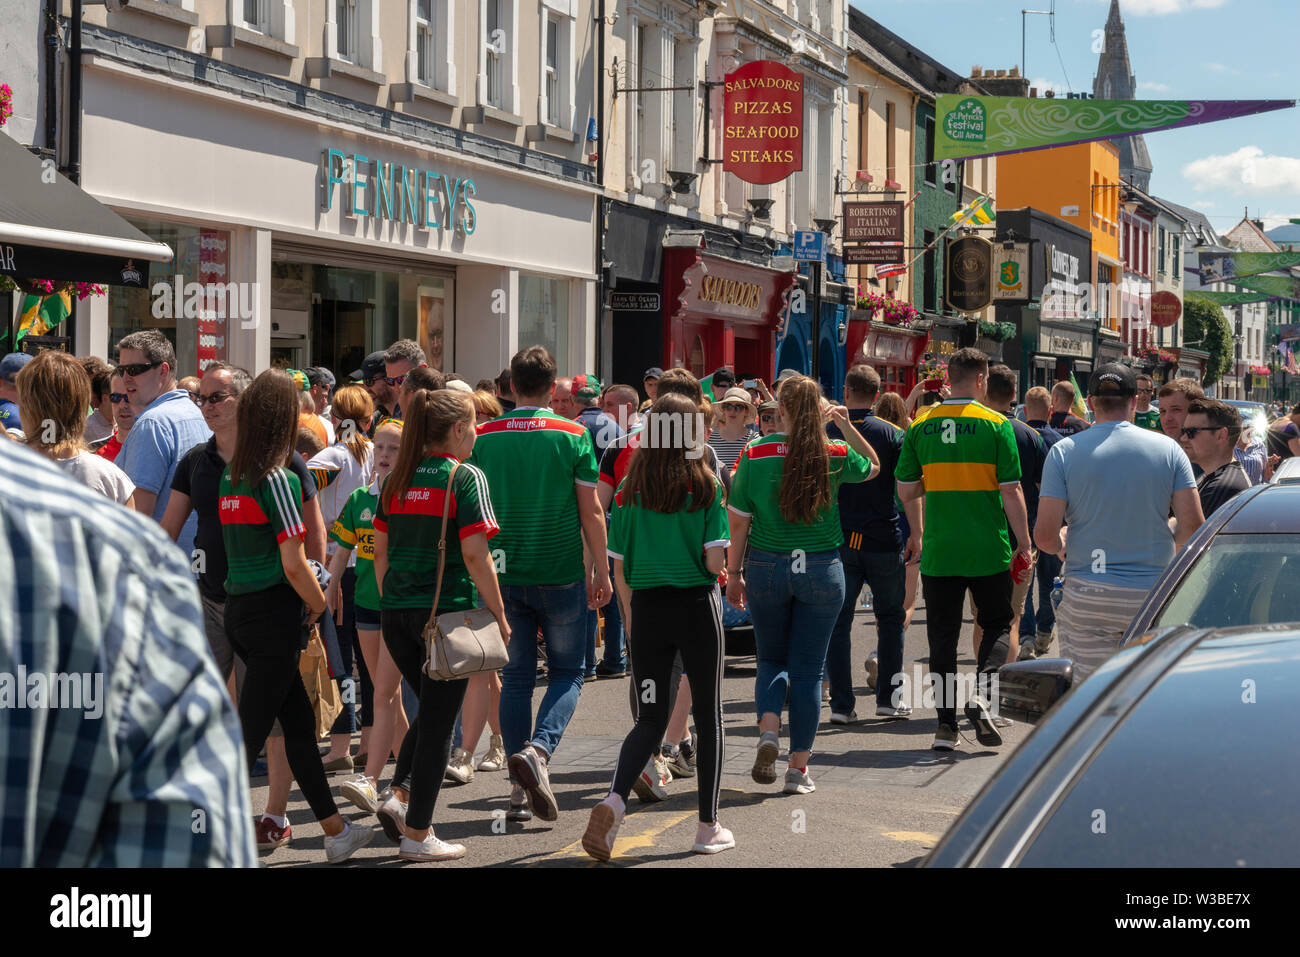 Match day in Killarney, County Kerry, Ireland. Gaelic football fans supporters on the Killarney High street before the Mayo and Kerry game in July 2019. Stock Photo